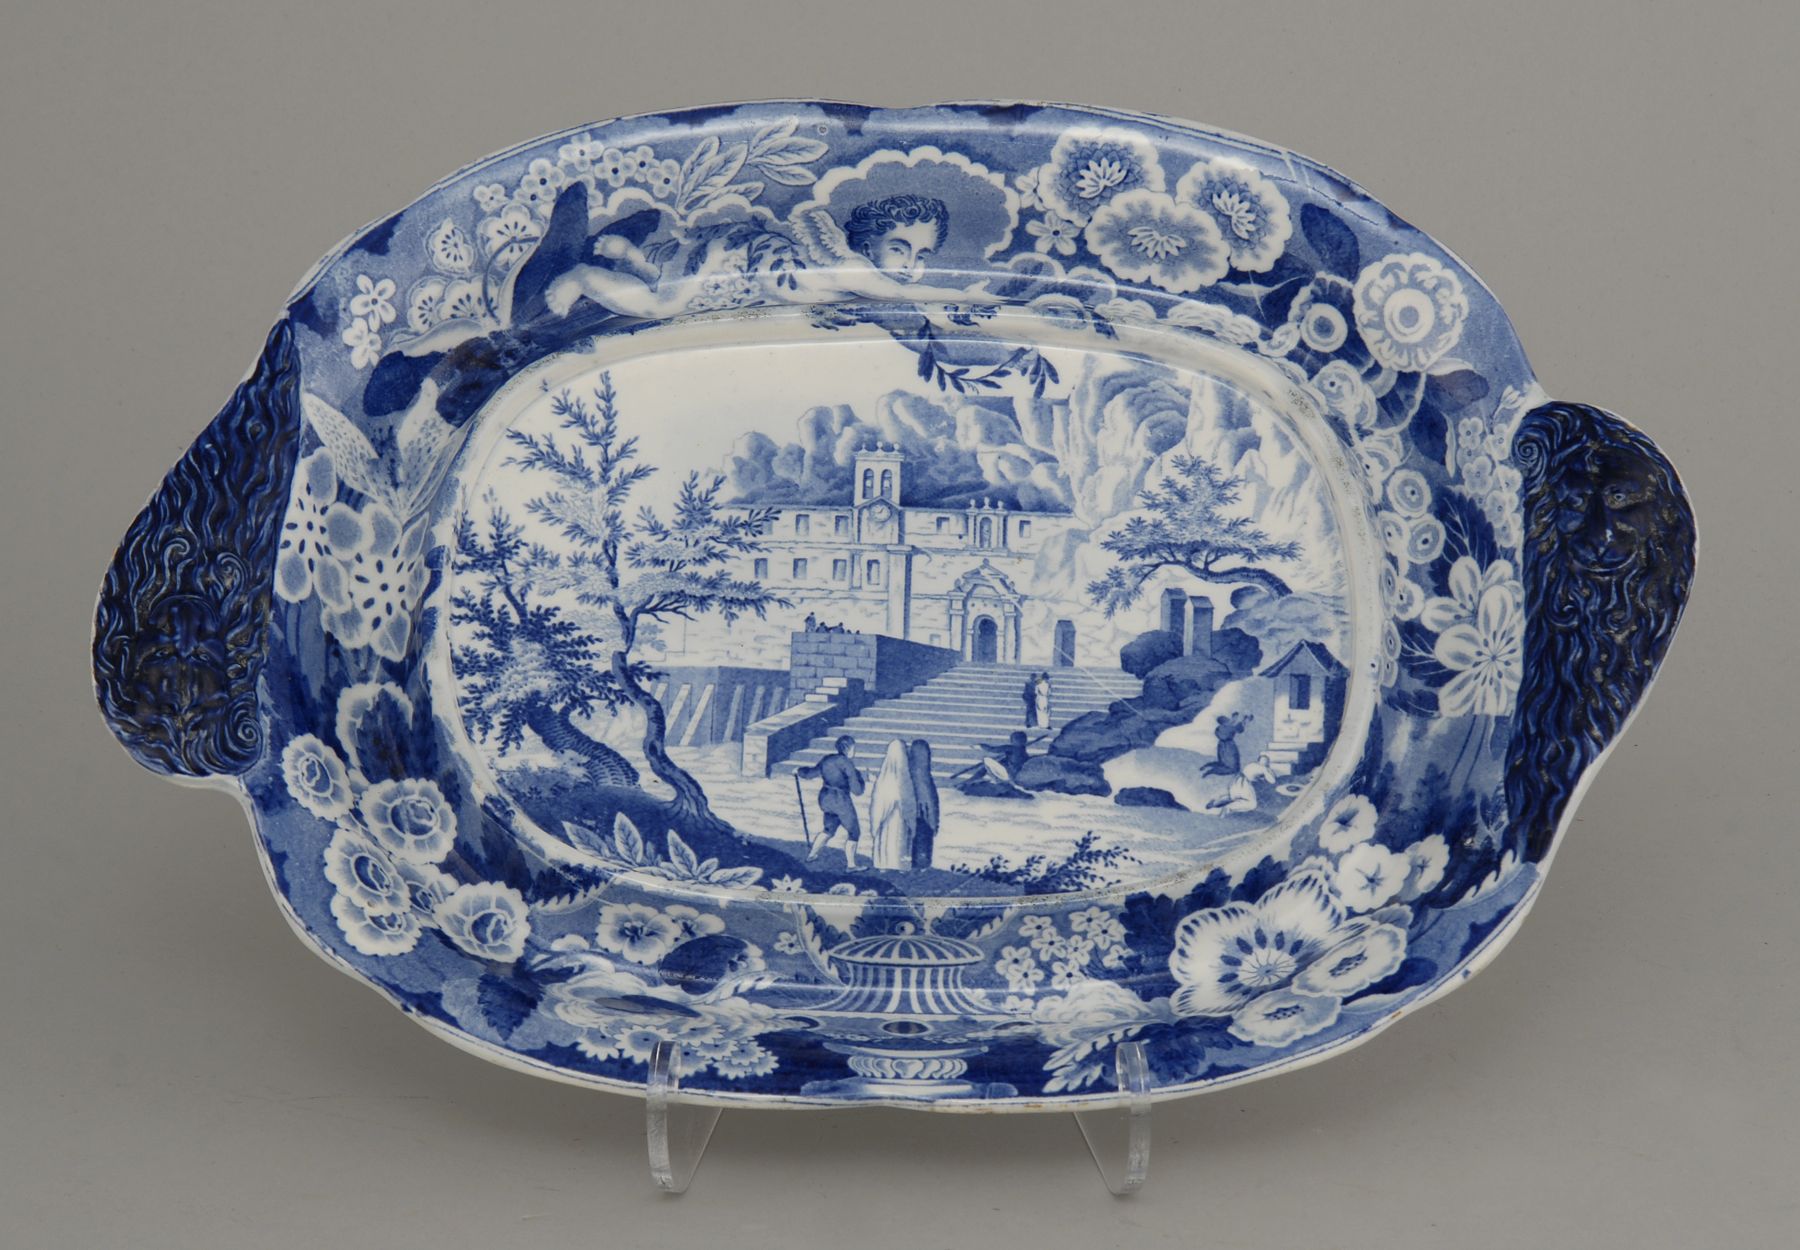 EARLY STAFFORDSHIRE BLUE AND WHITE OVAL